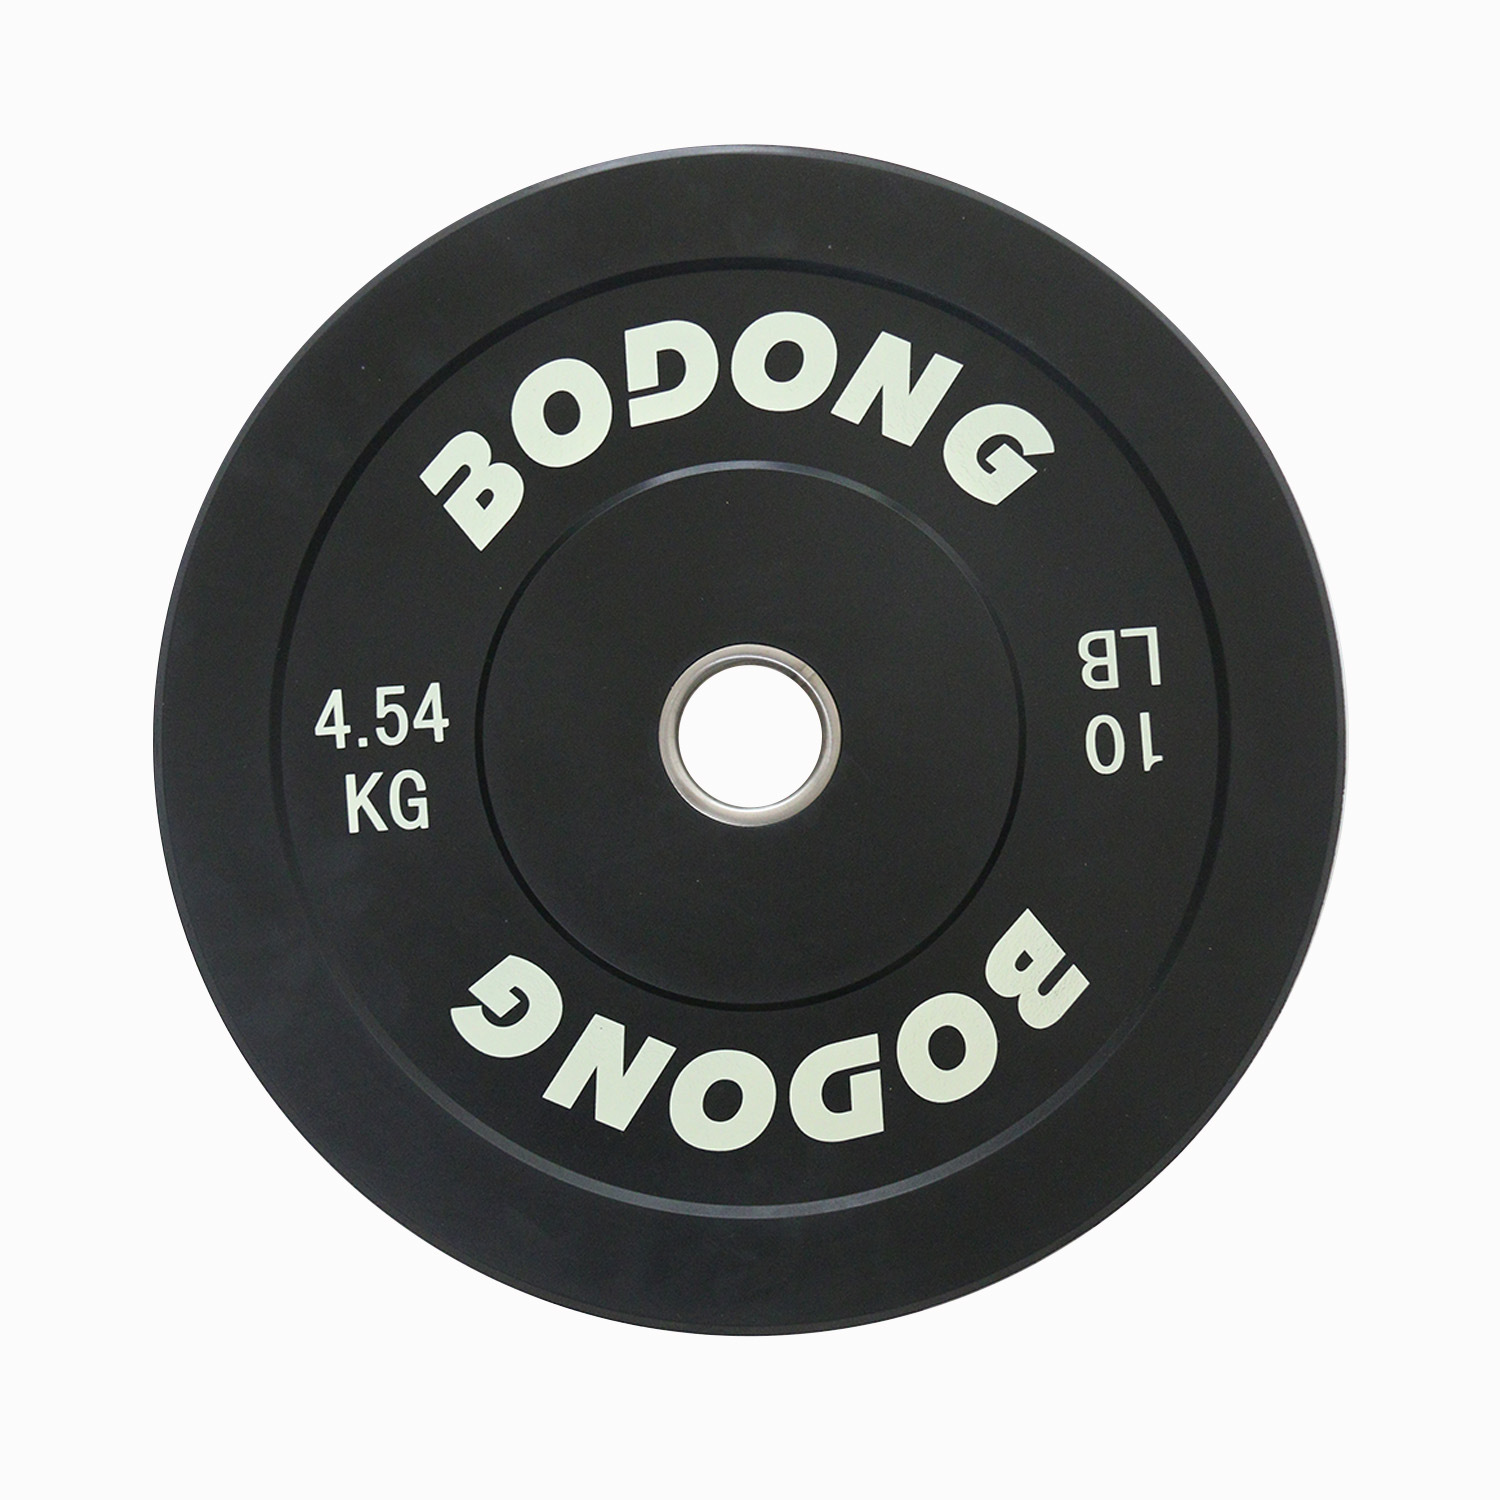 China Home Gym Free Weight Black Rubber Barbell Bumper Plates Featured Image